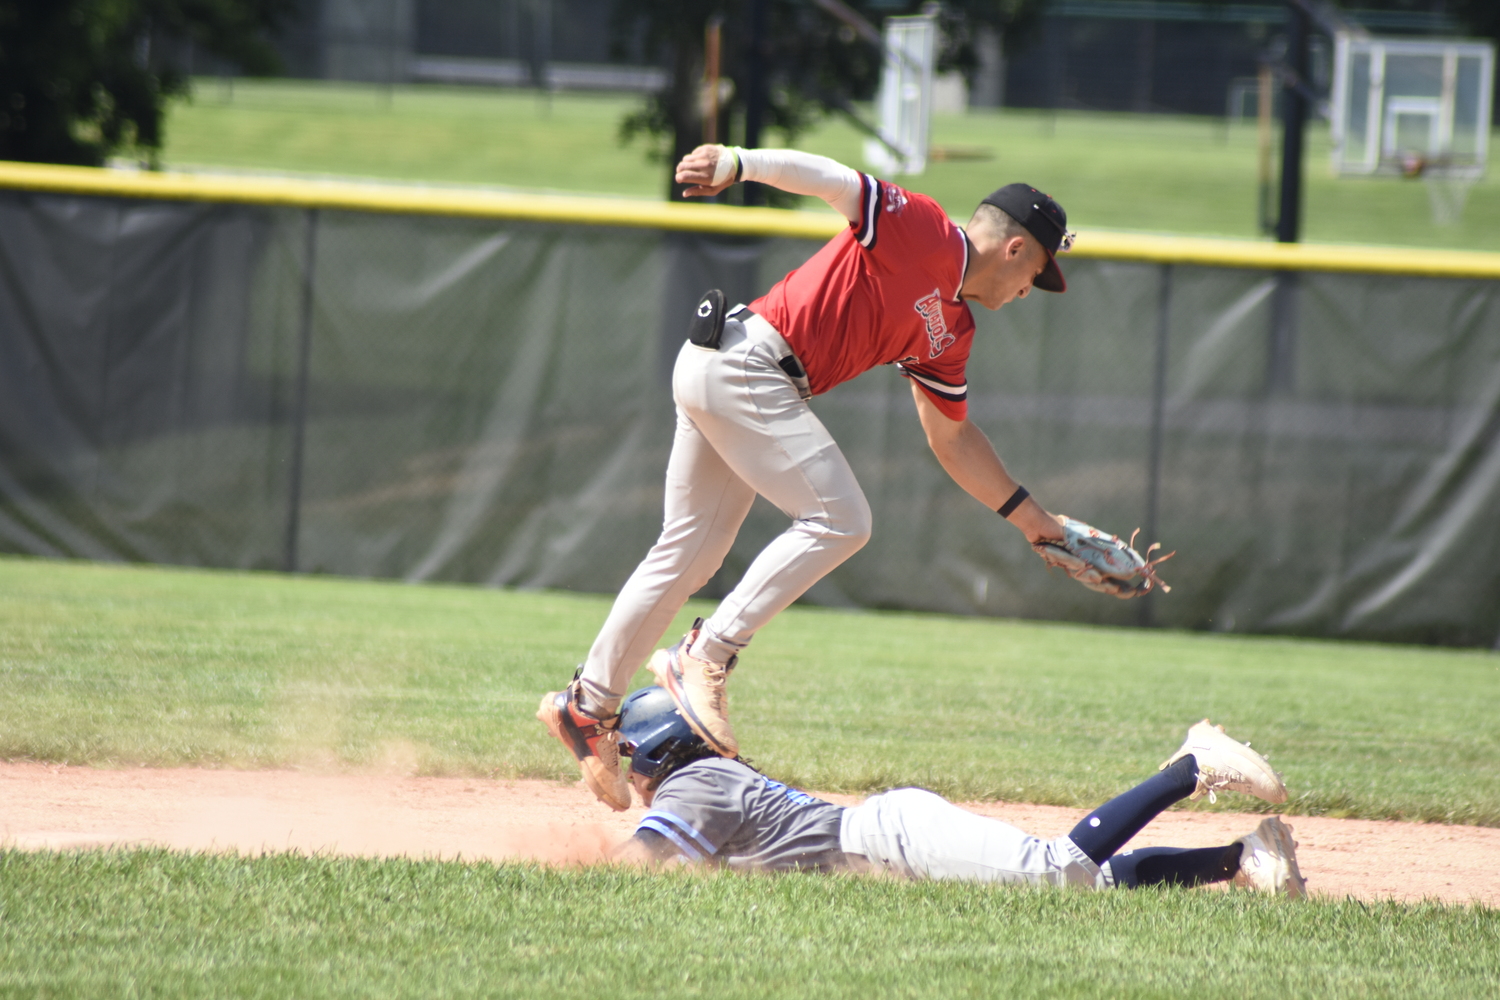 Westhampton's Matt Torres (Dickinson) tries to get a tag down on Whaler T.J. Werner (Farleigh Dickinson) who steals second base.    DREW BUDD